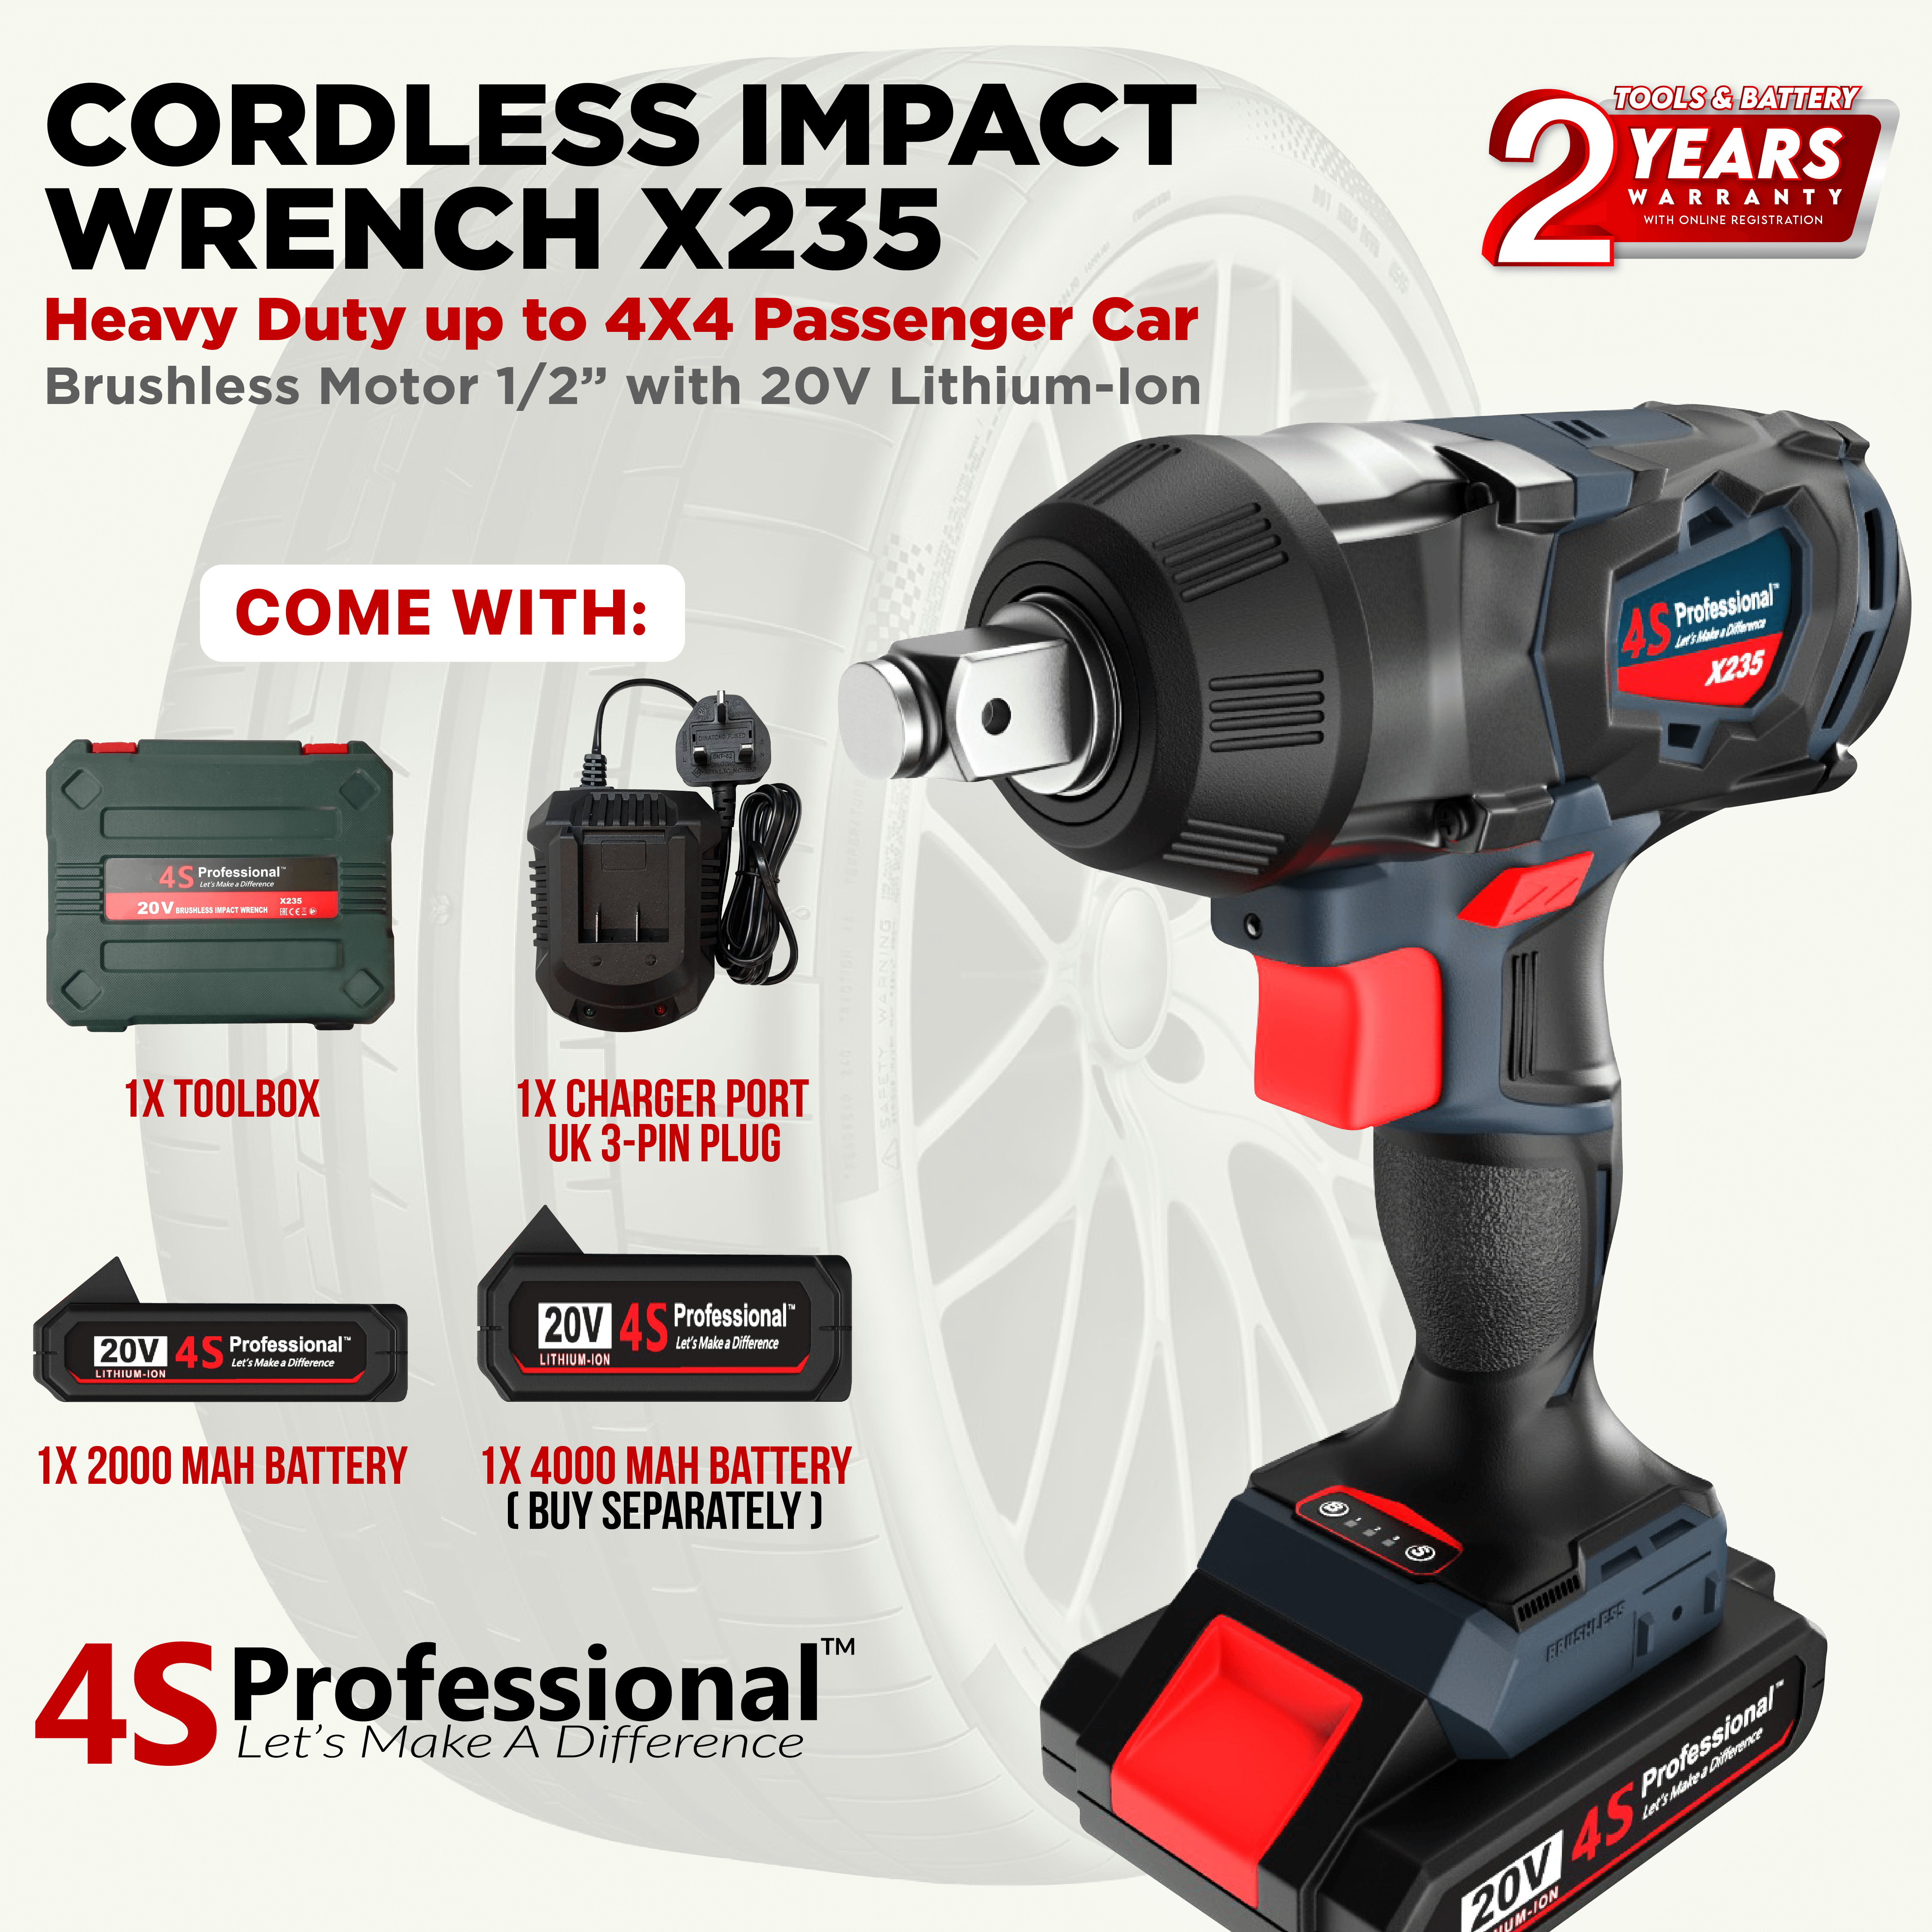 4S Professional™ Cordless Impact Wrench X235 Heavy Duty 20V 3-in-1 [Brushless Series] Replace Spanner 2 Years Warranty